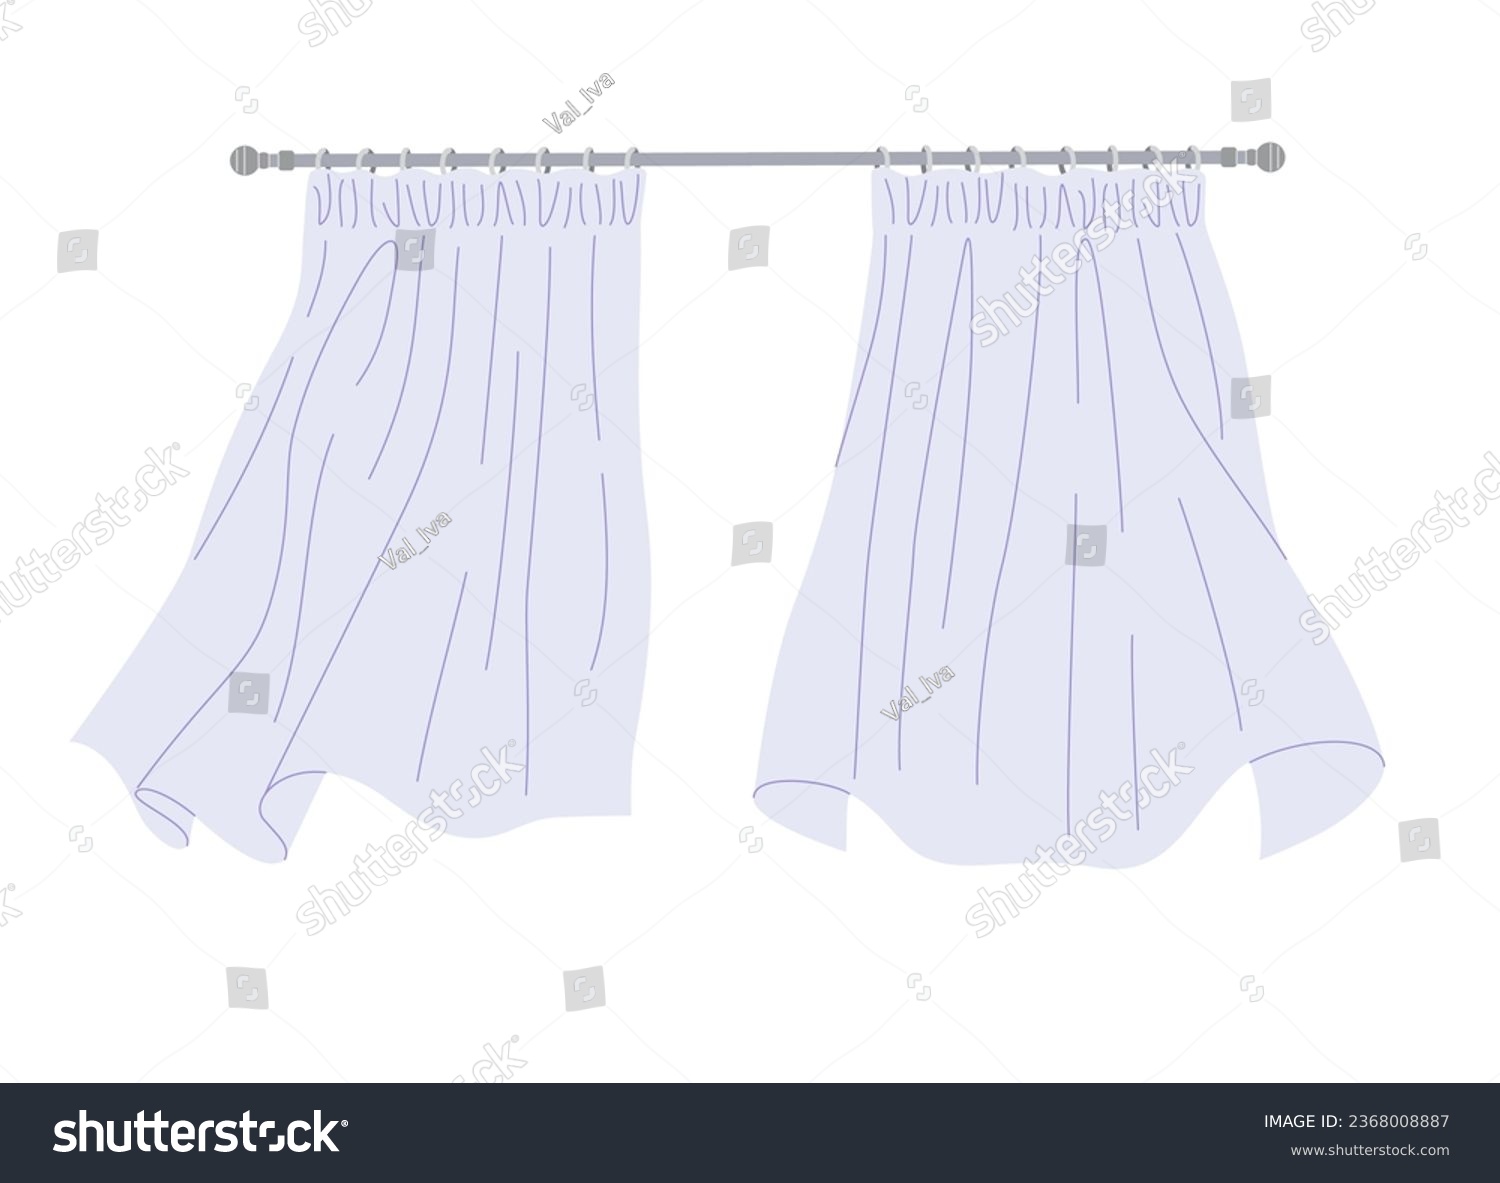 SVG of Light blue window curtains flutter in the wind isolated on white. Two curtains hanging on the rod. Element for room interior. Simple vector flat illustration.  svg